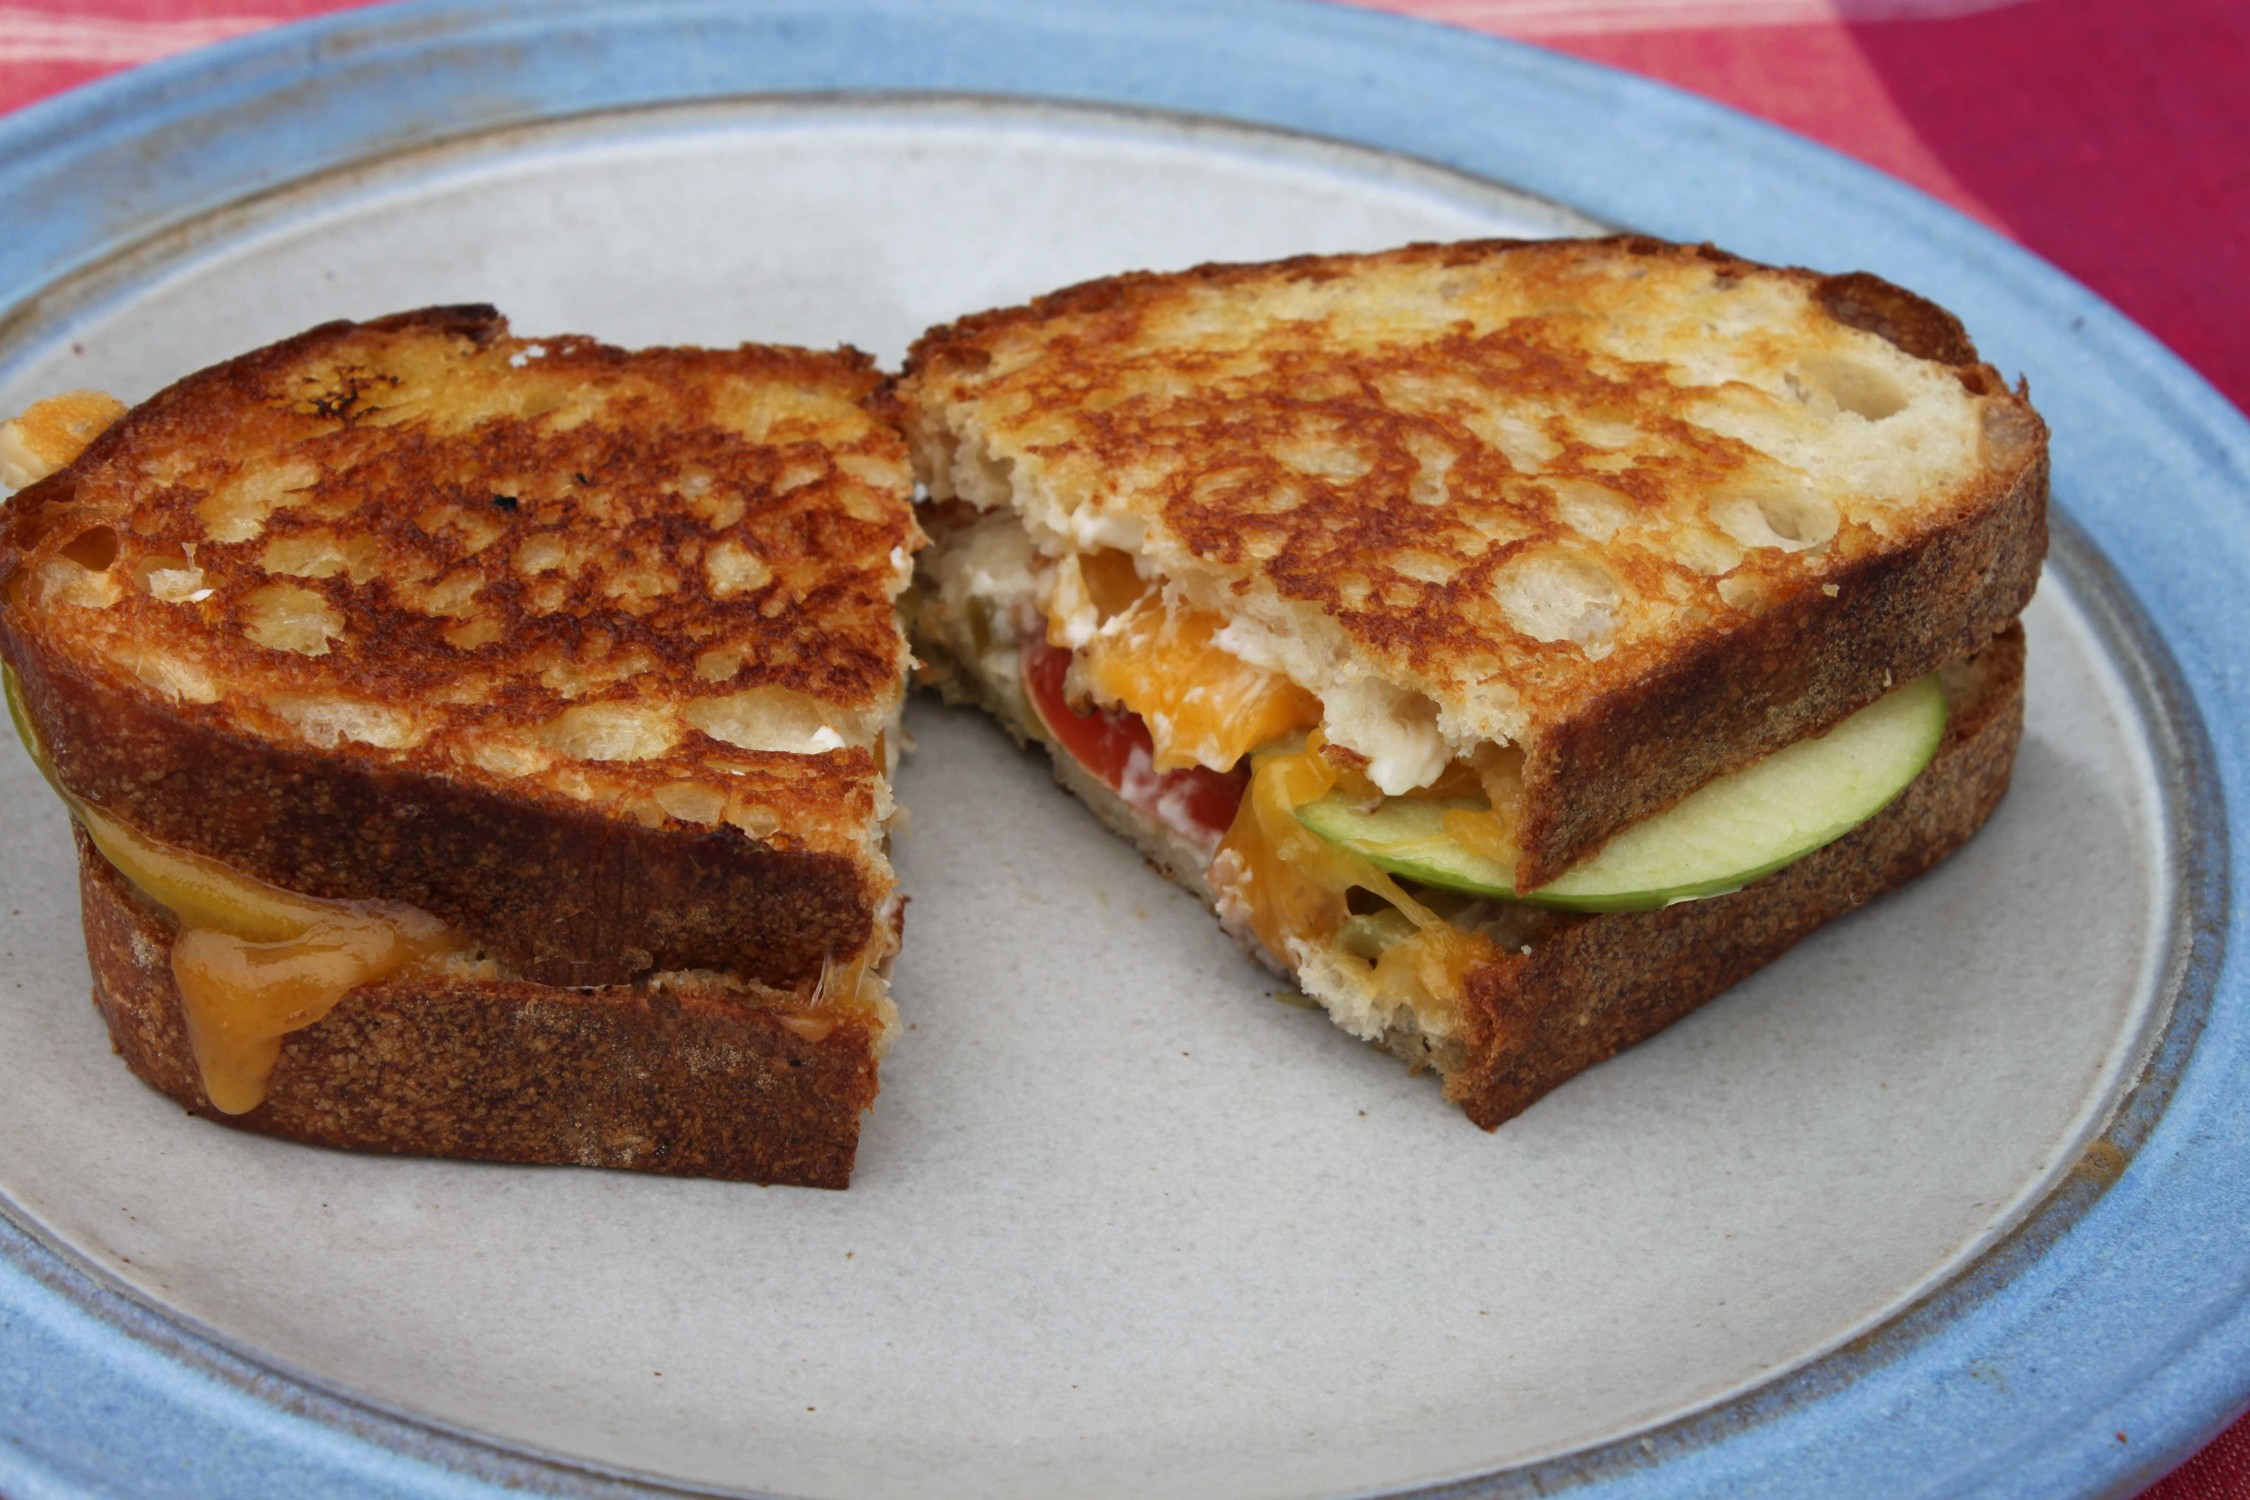 James' Grilled Cheese Dream - PHOTO BY JAMES SCOTHORN